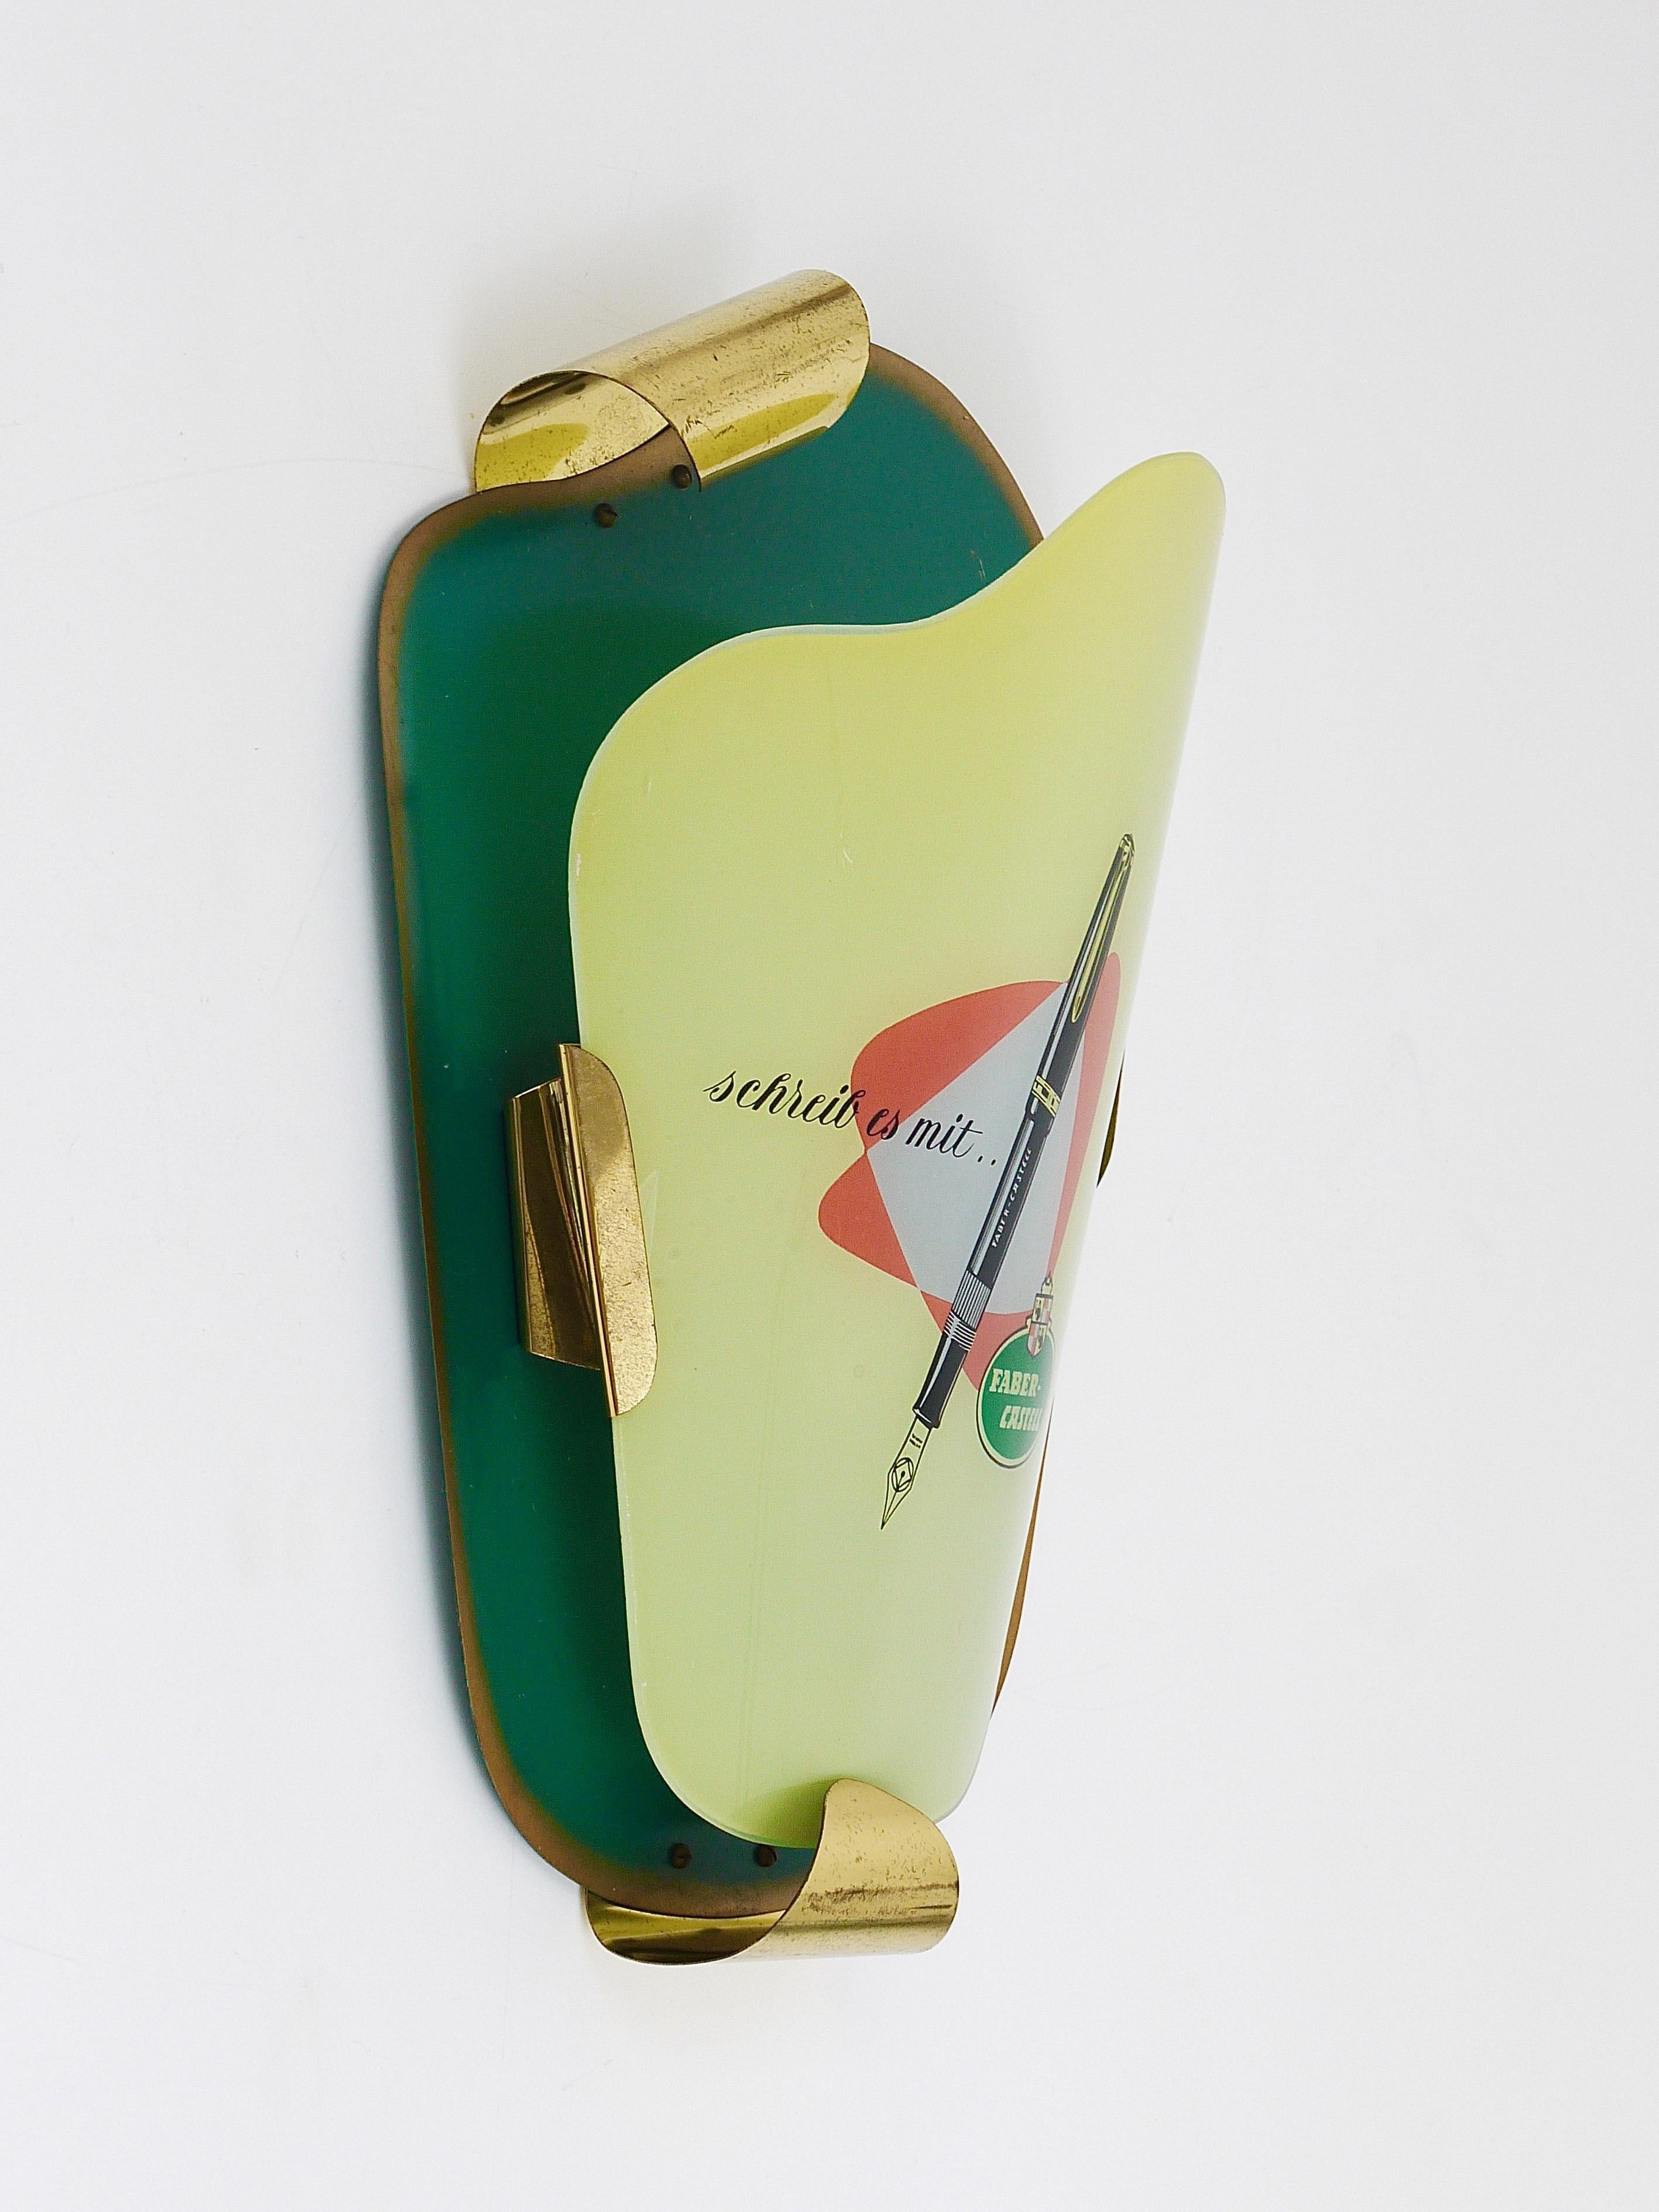 Metal Charming 1950s Faber-Castell Green Brass Wall Lamp Advertising Sign Sconce